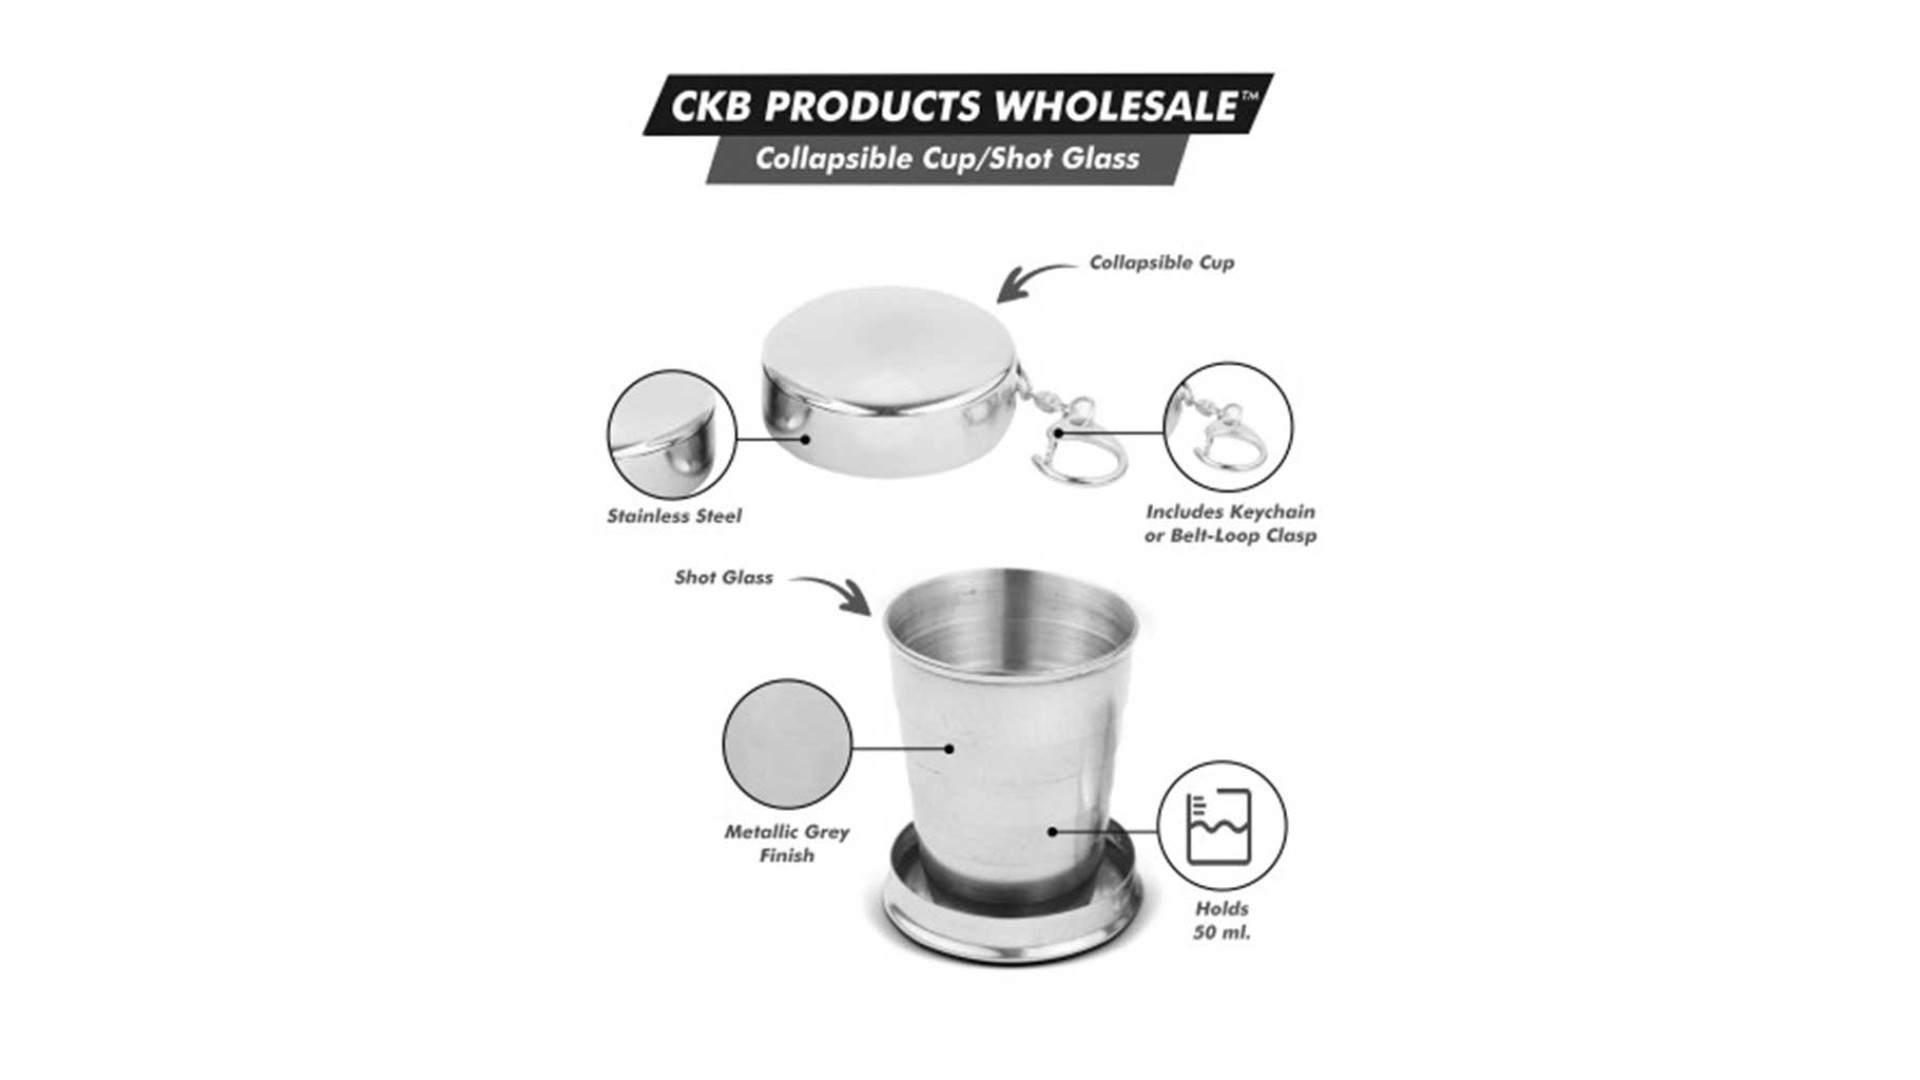 https://www.ckbproducts.com/image/cache/catalog/Ckb%20blog/Collapsible-cup-1920x1080.jpg